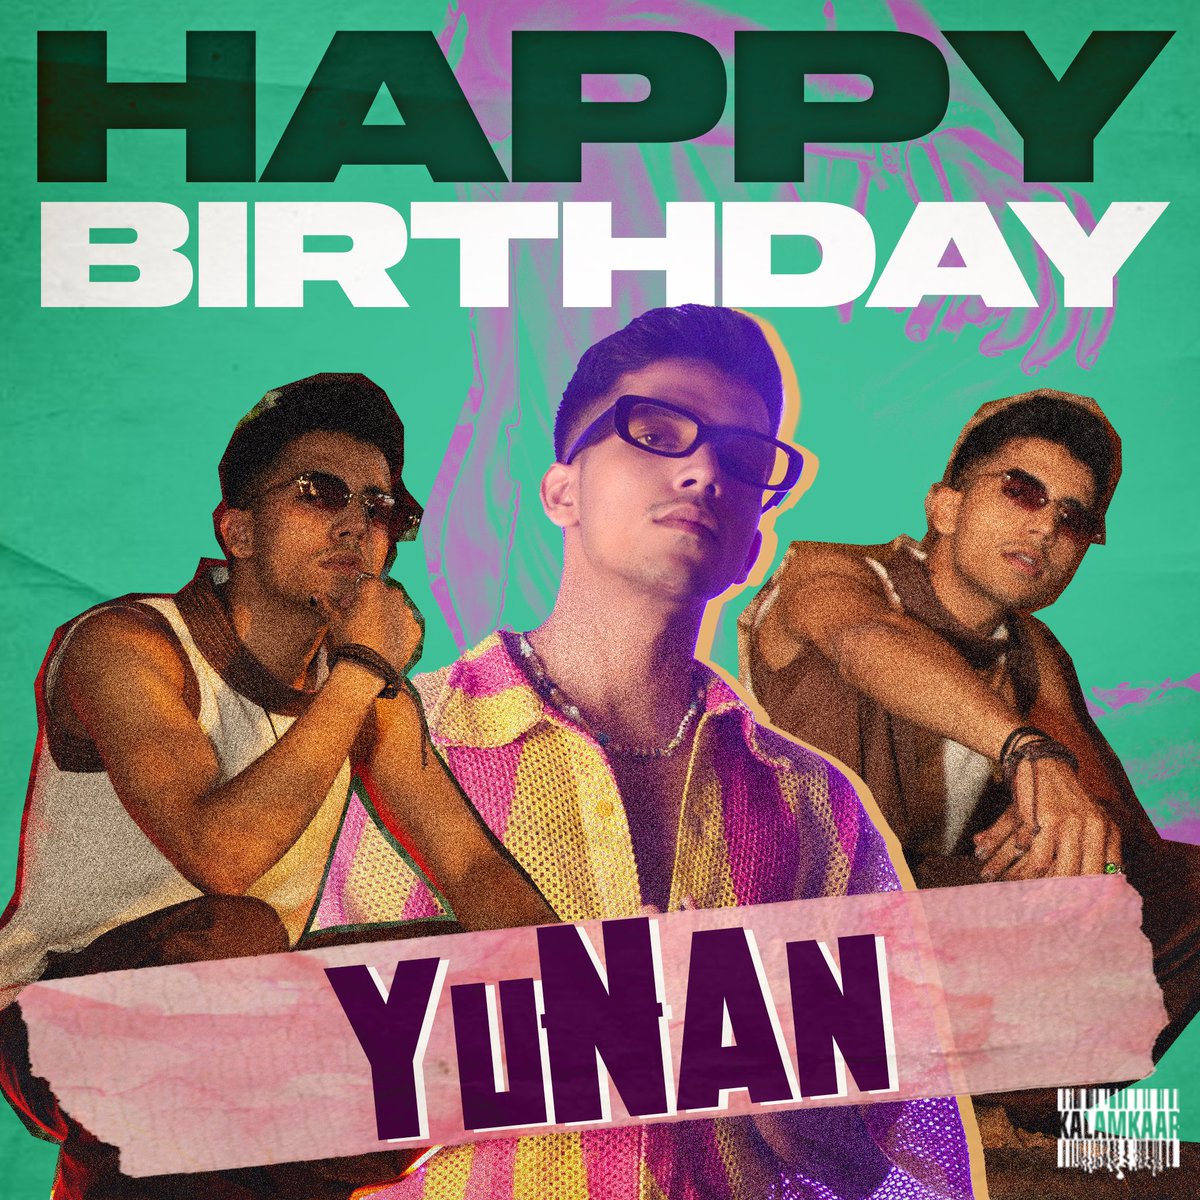 It’s official YUNAN day, so here’s wishing the best to our resident WZKD ❤️‍🔥 #HappyBirthday #Yunan #youknowyunan #yny #WZKD